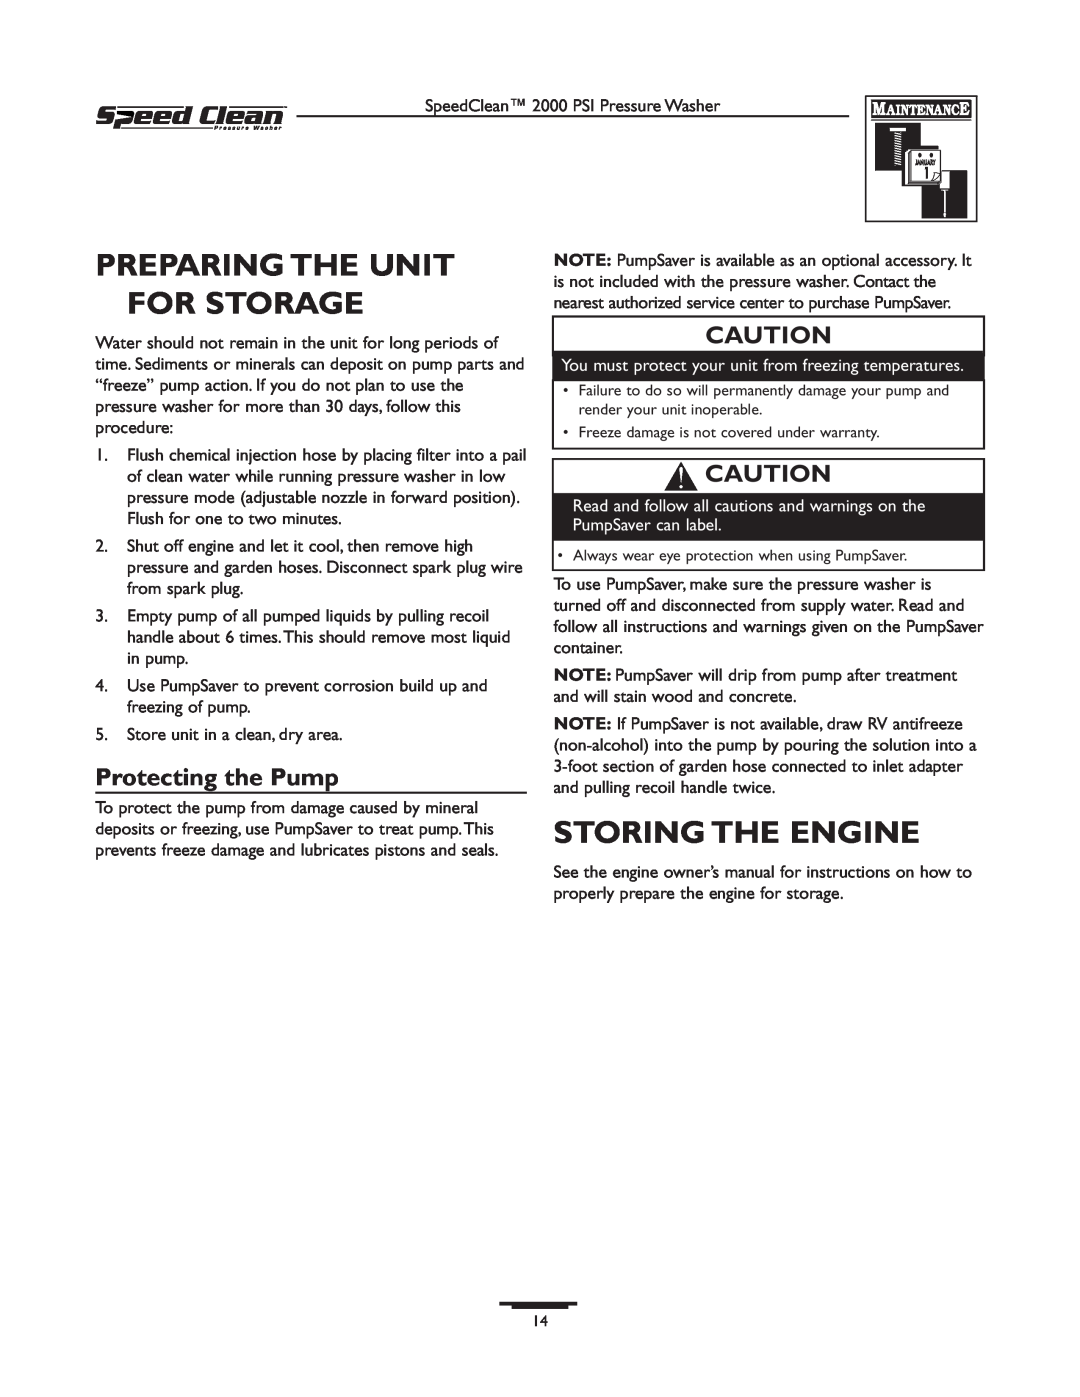 Briggs & Stratton 020211-0 owner manual Preparing The Unit For Storage, Storing The Engine, Protecting the Pump 